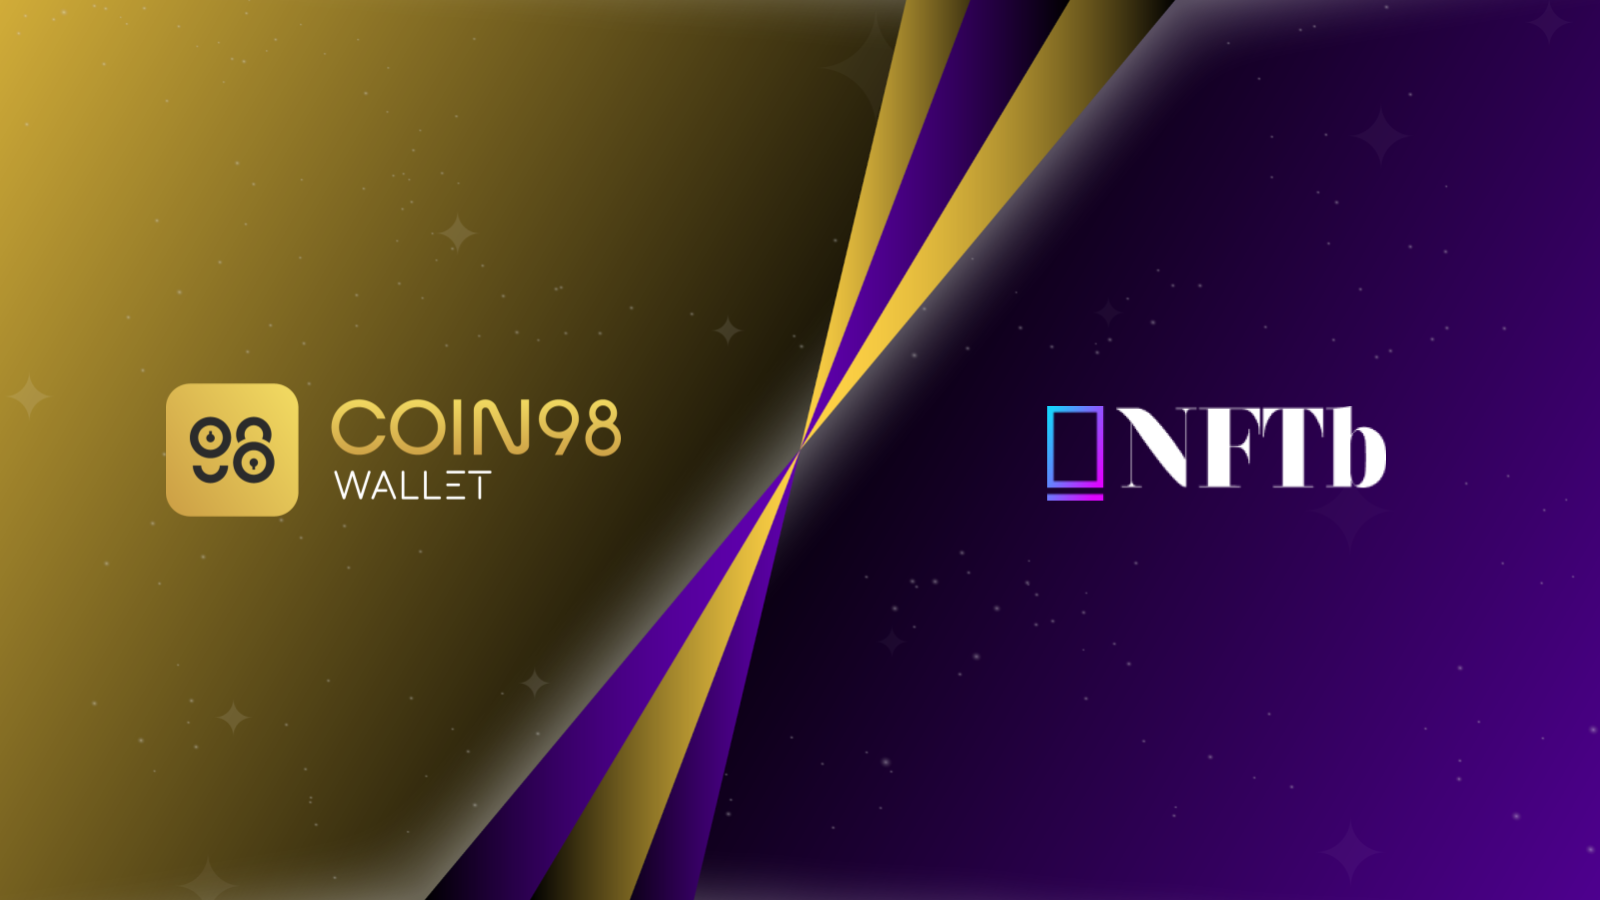 Coin98 Wallet empowers users with the benefits of NFTs + DeFi by building the integration with NFTb